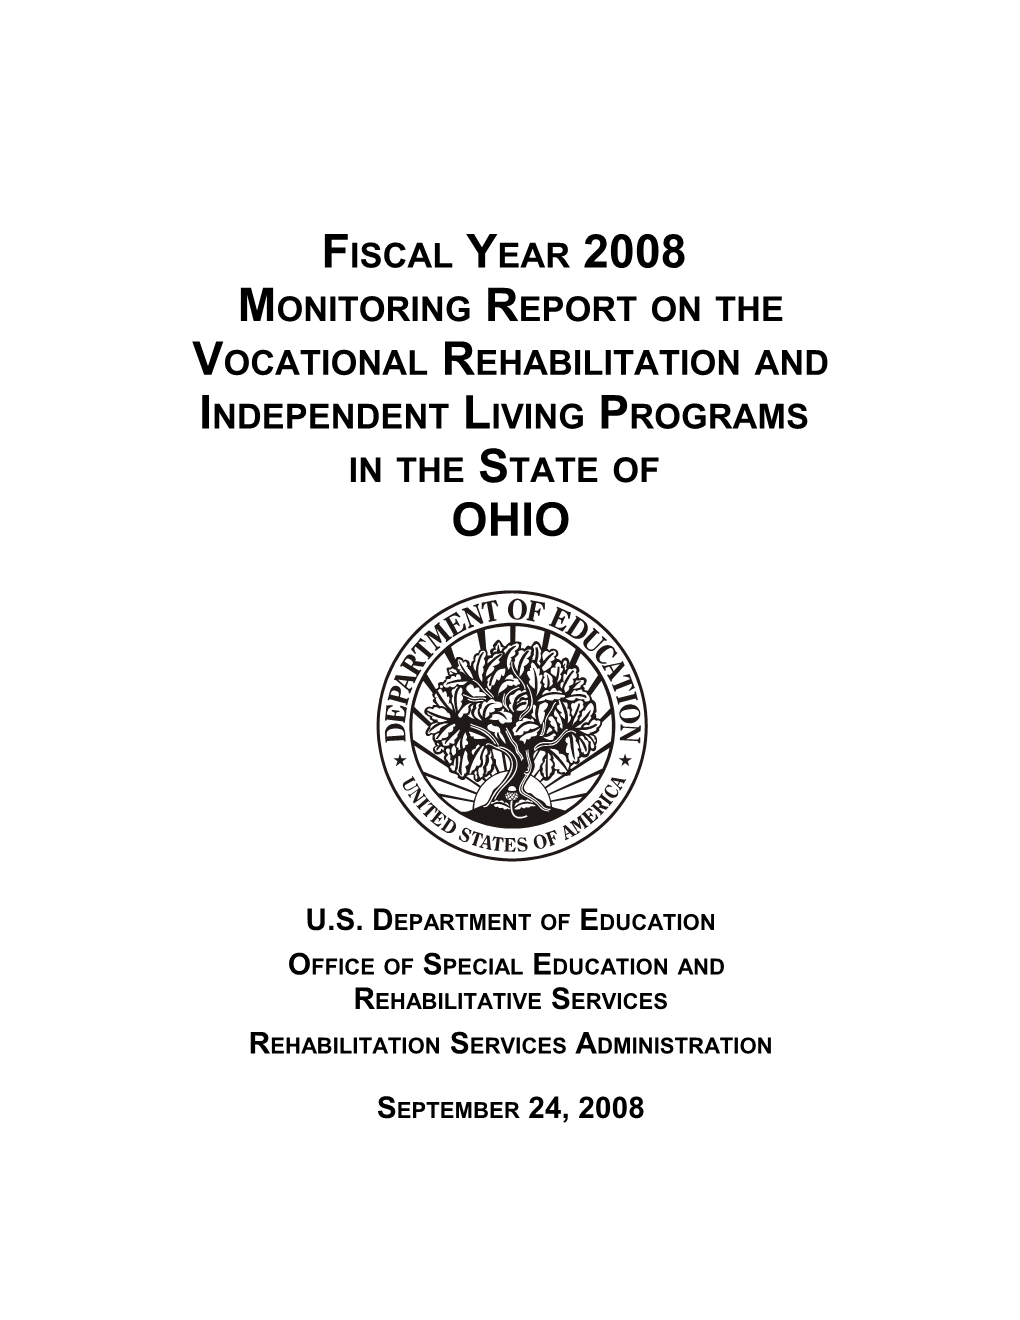 Fiscal Year 2008 Monitoring Report on the Vocational Rehabilitation and Independent Living